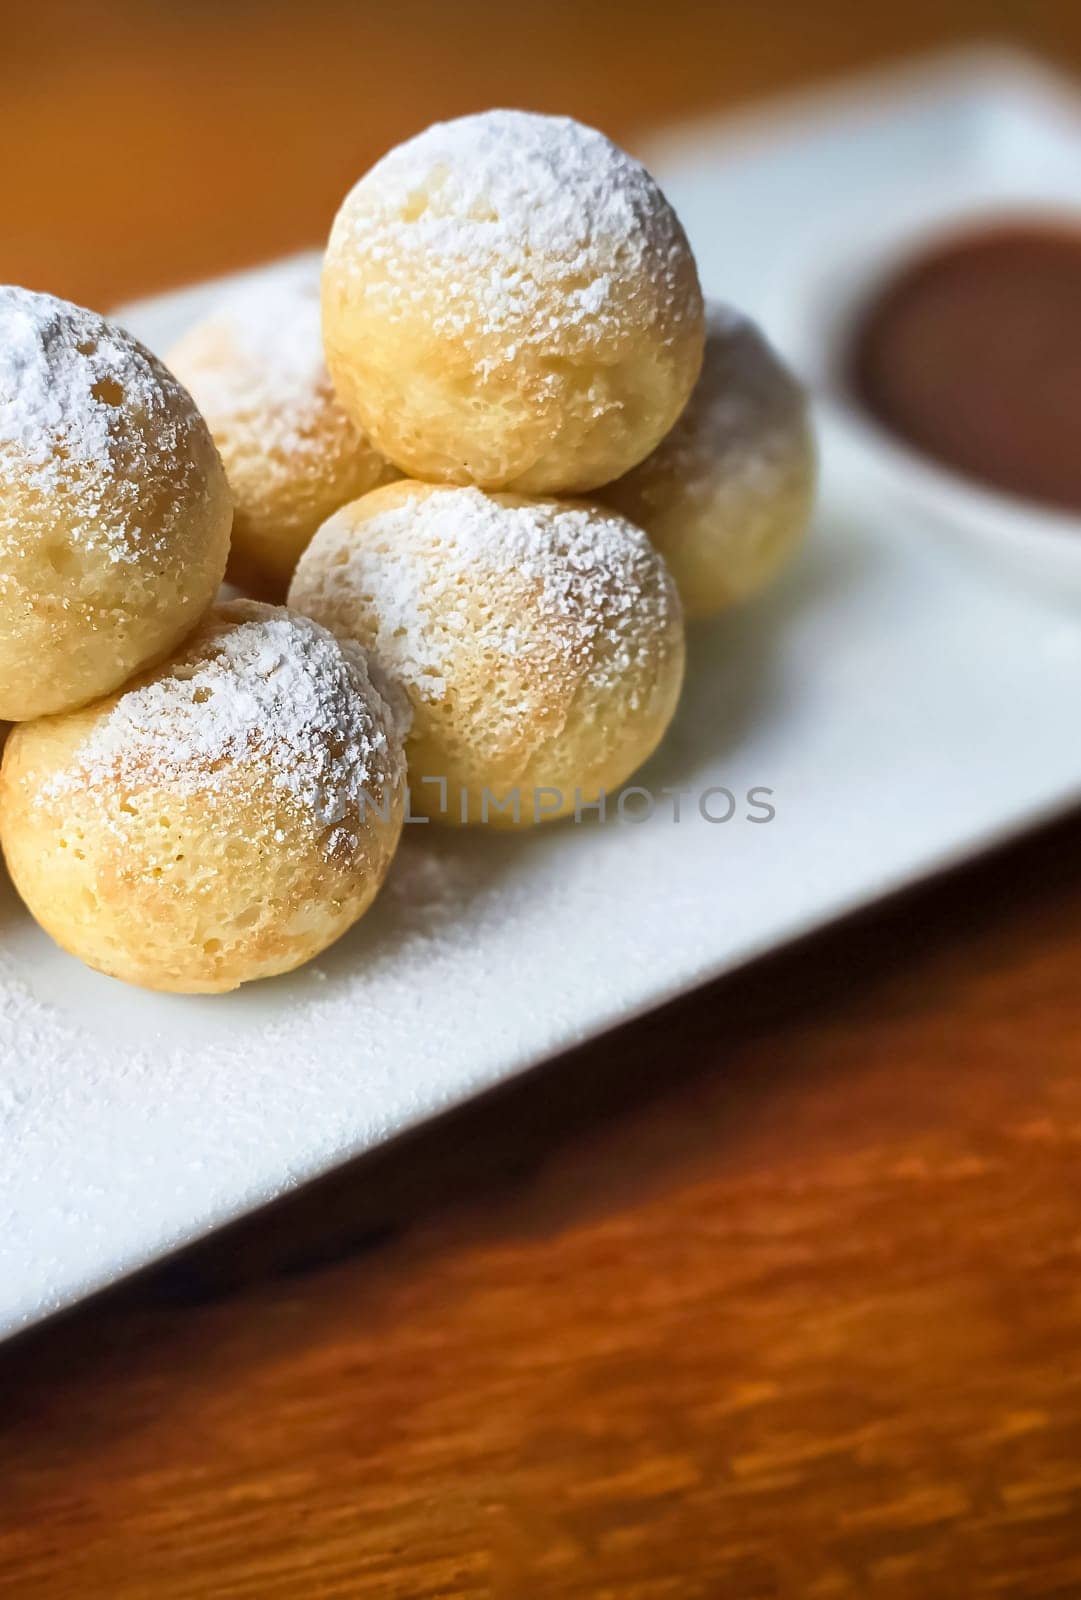 Homemade Dutch poffertjes mini pancakes with icing powdered sugar and chocolate fillings with additional chocolate sauce by antoksena